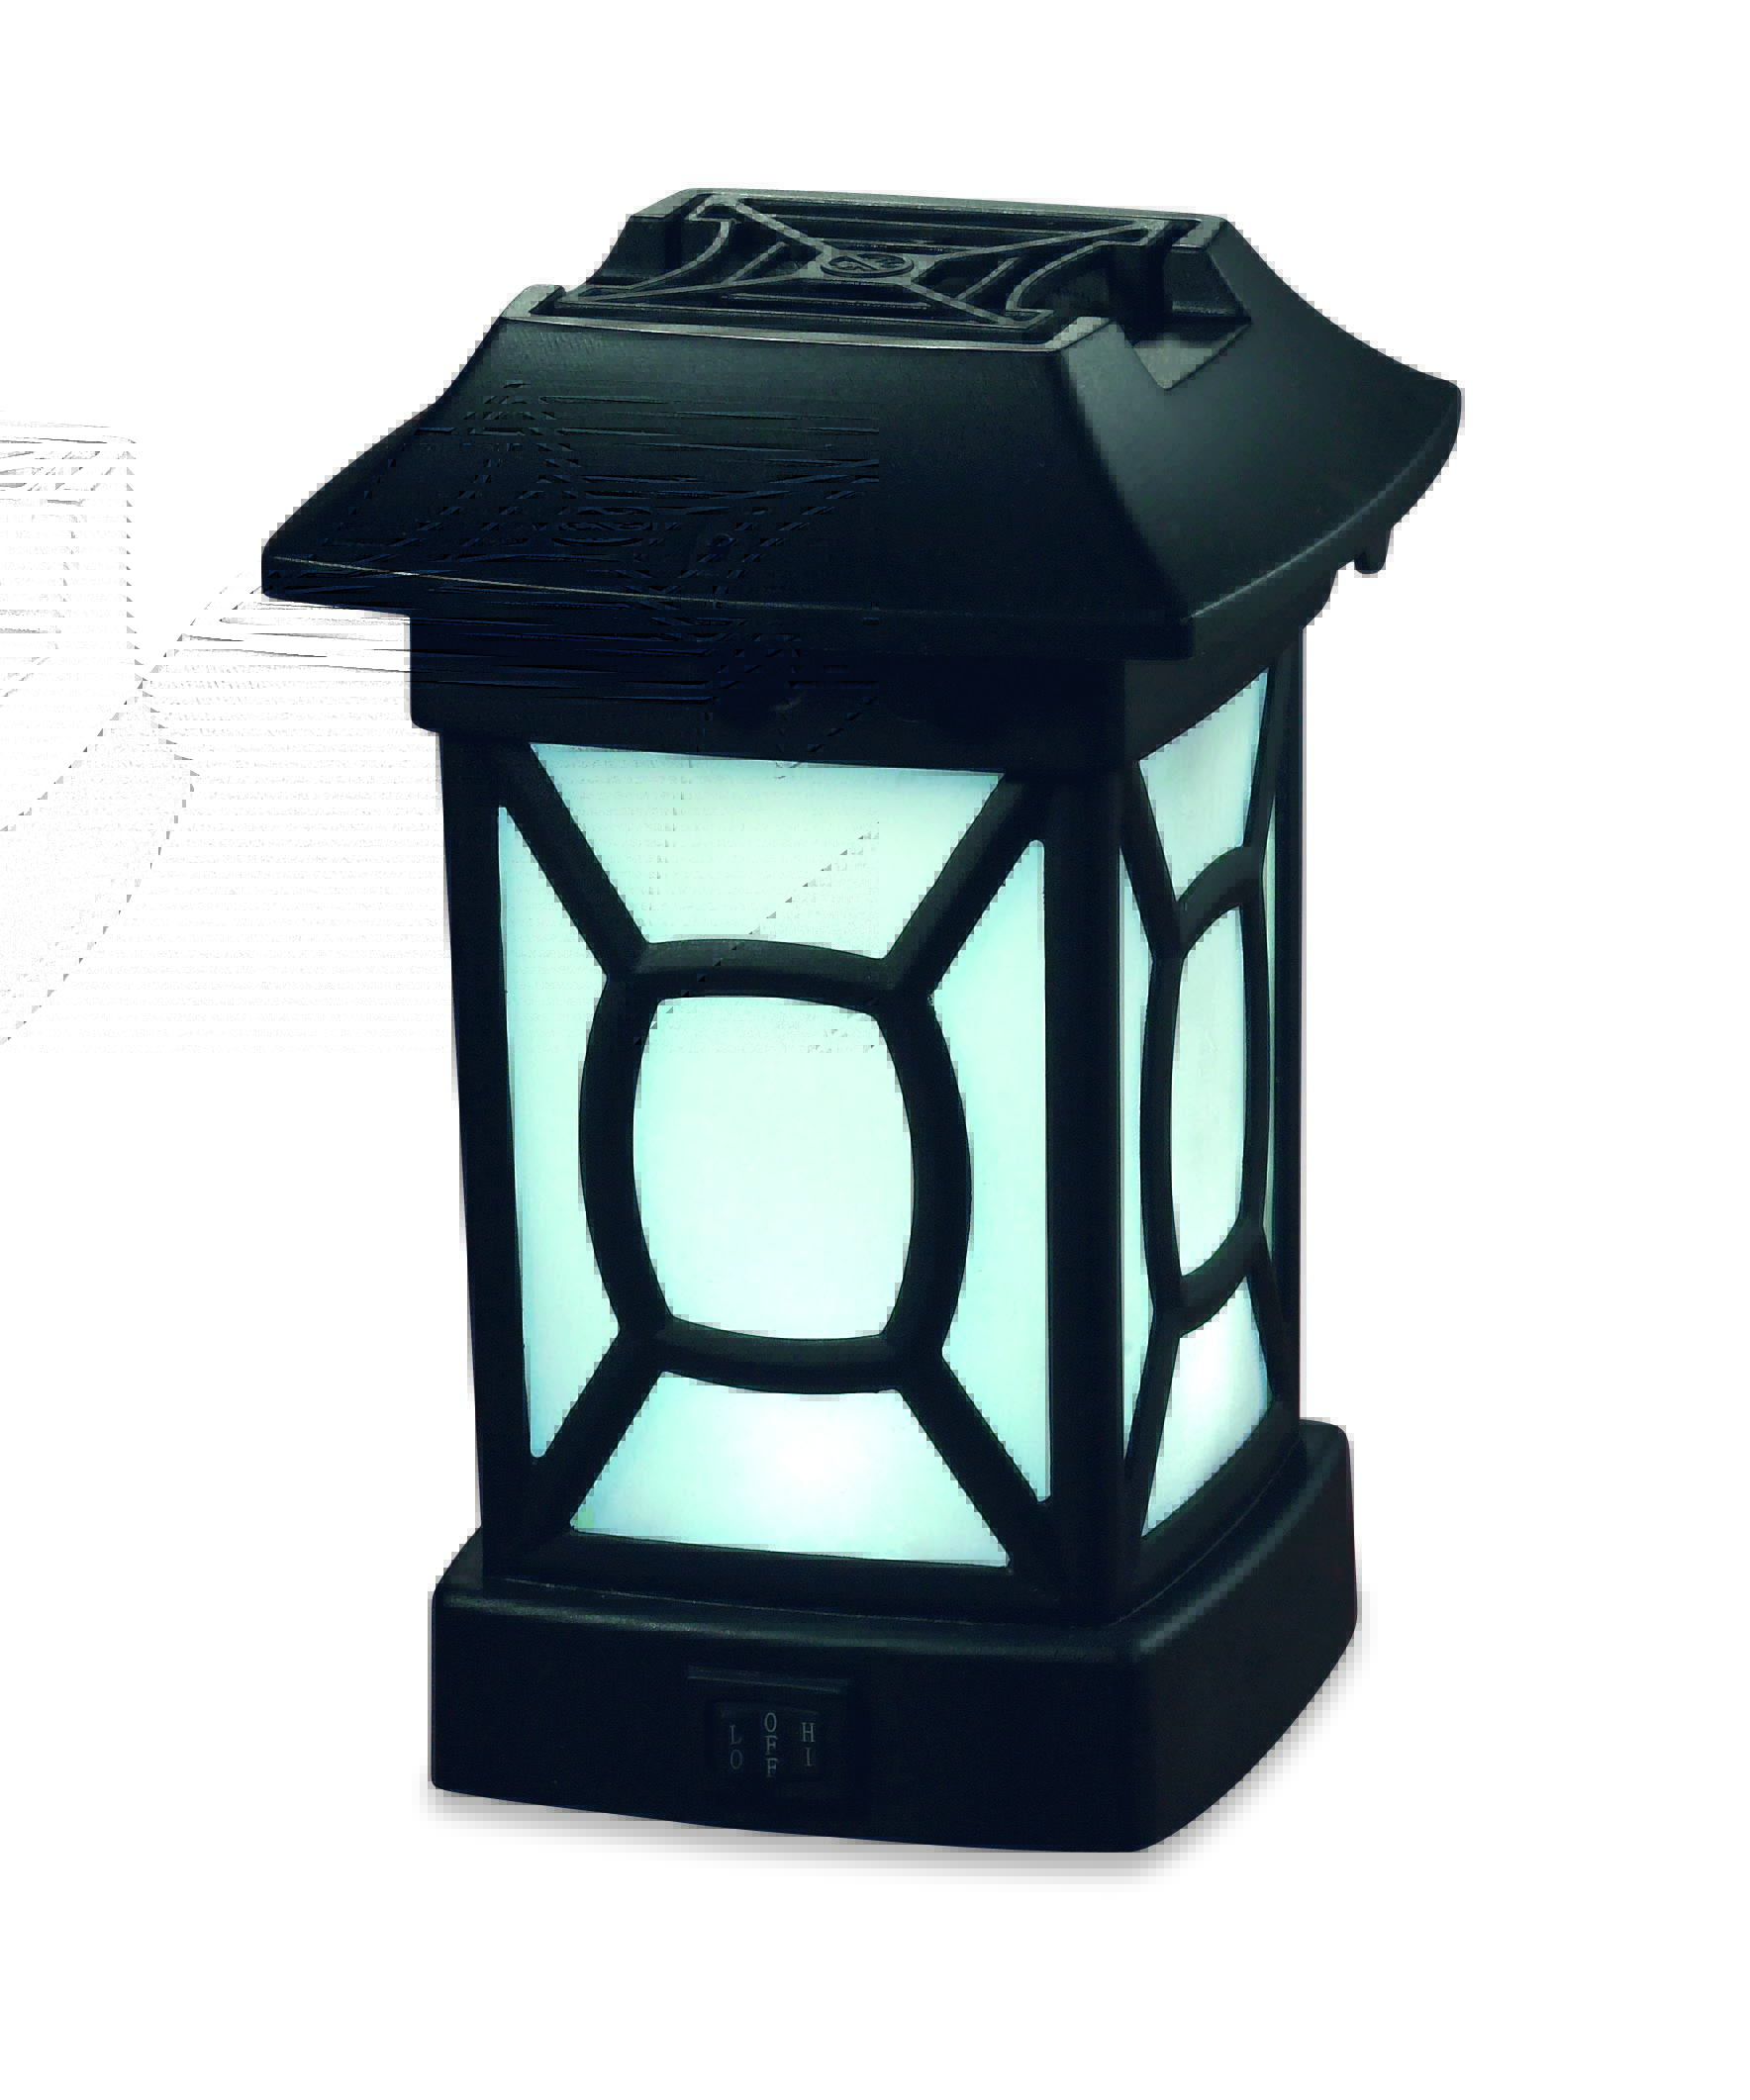 ThermaCELL Patio Lantern Review and Giveaway